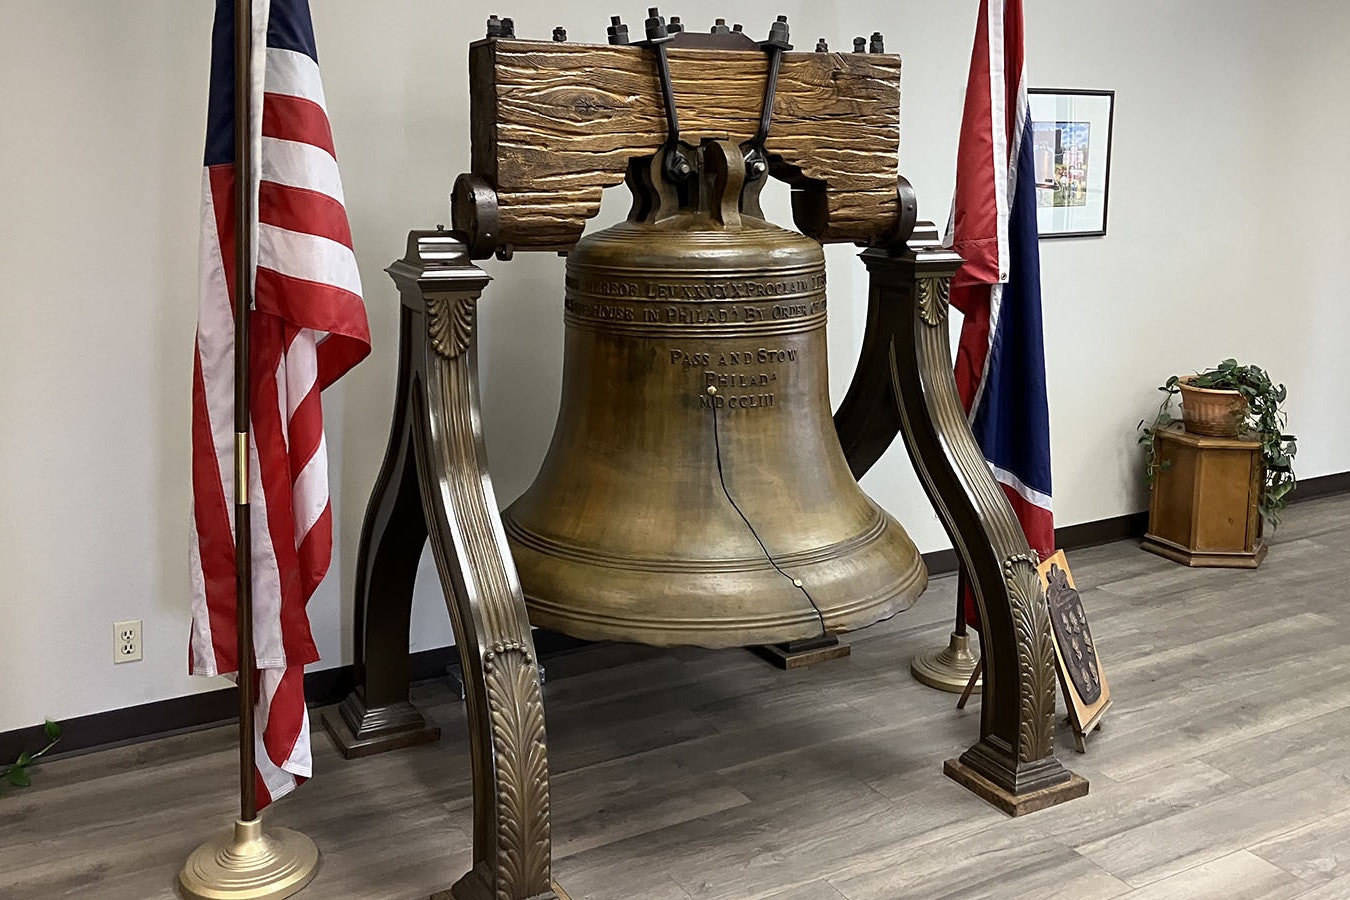 An exact replica of the Liberty Bell that rests in Independence Hall in Philadephia can be found in a Mills foundry’s lobby.